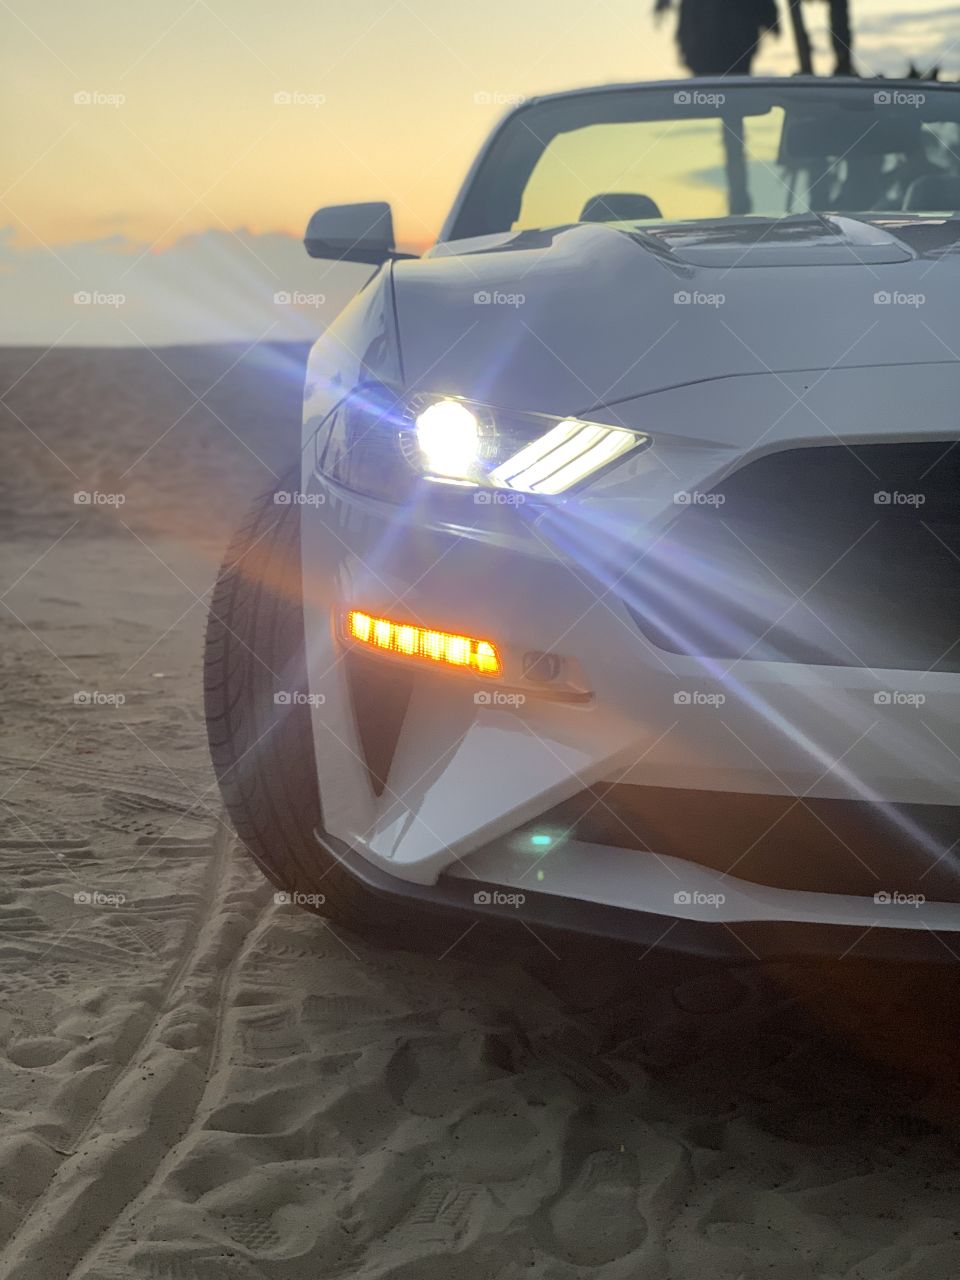 Great capture of my Ford Mustang at Venice beach!